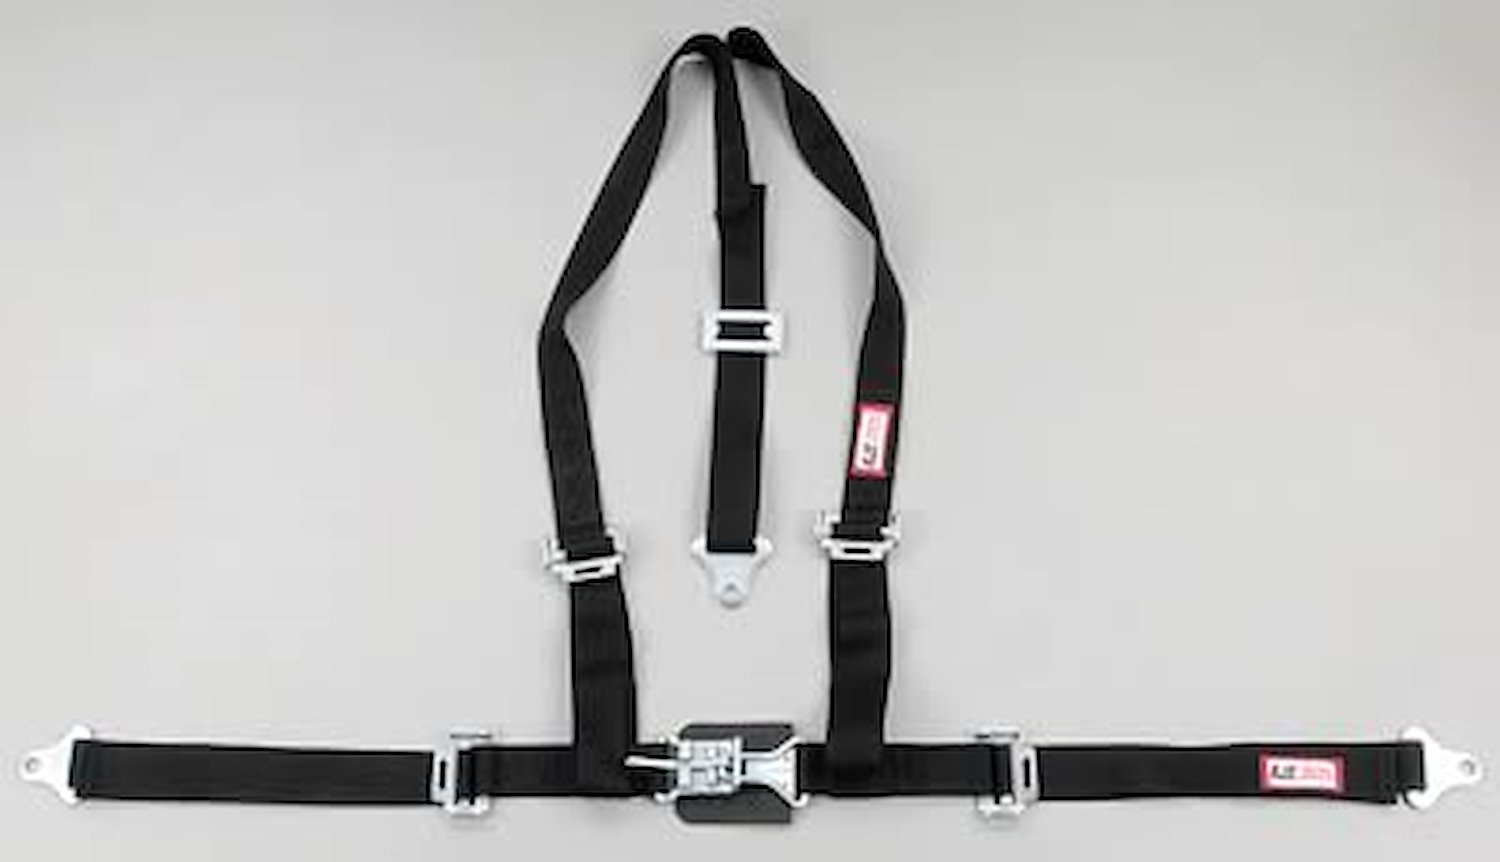 NON-SFI L&L HARNESS 2 PULL DOWN Lap Belt w/Adjuster SNAP 2 S.H. Individual FLOOR Mount WRAP/SNAP GRAY